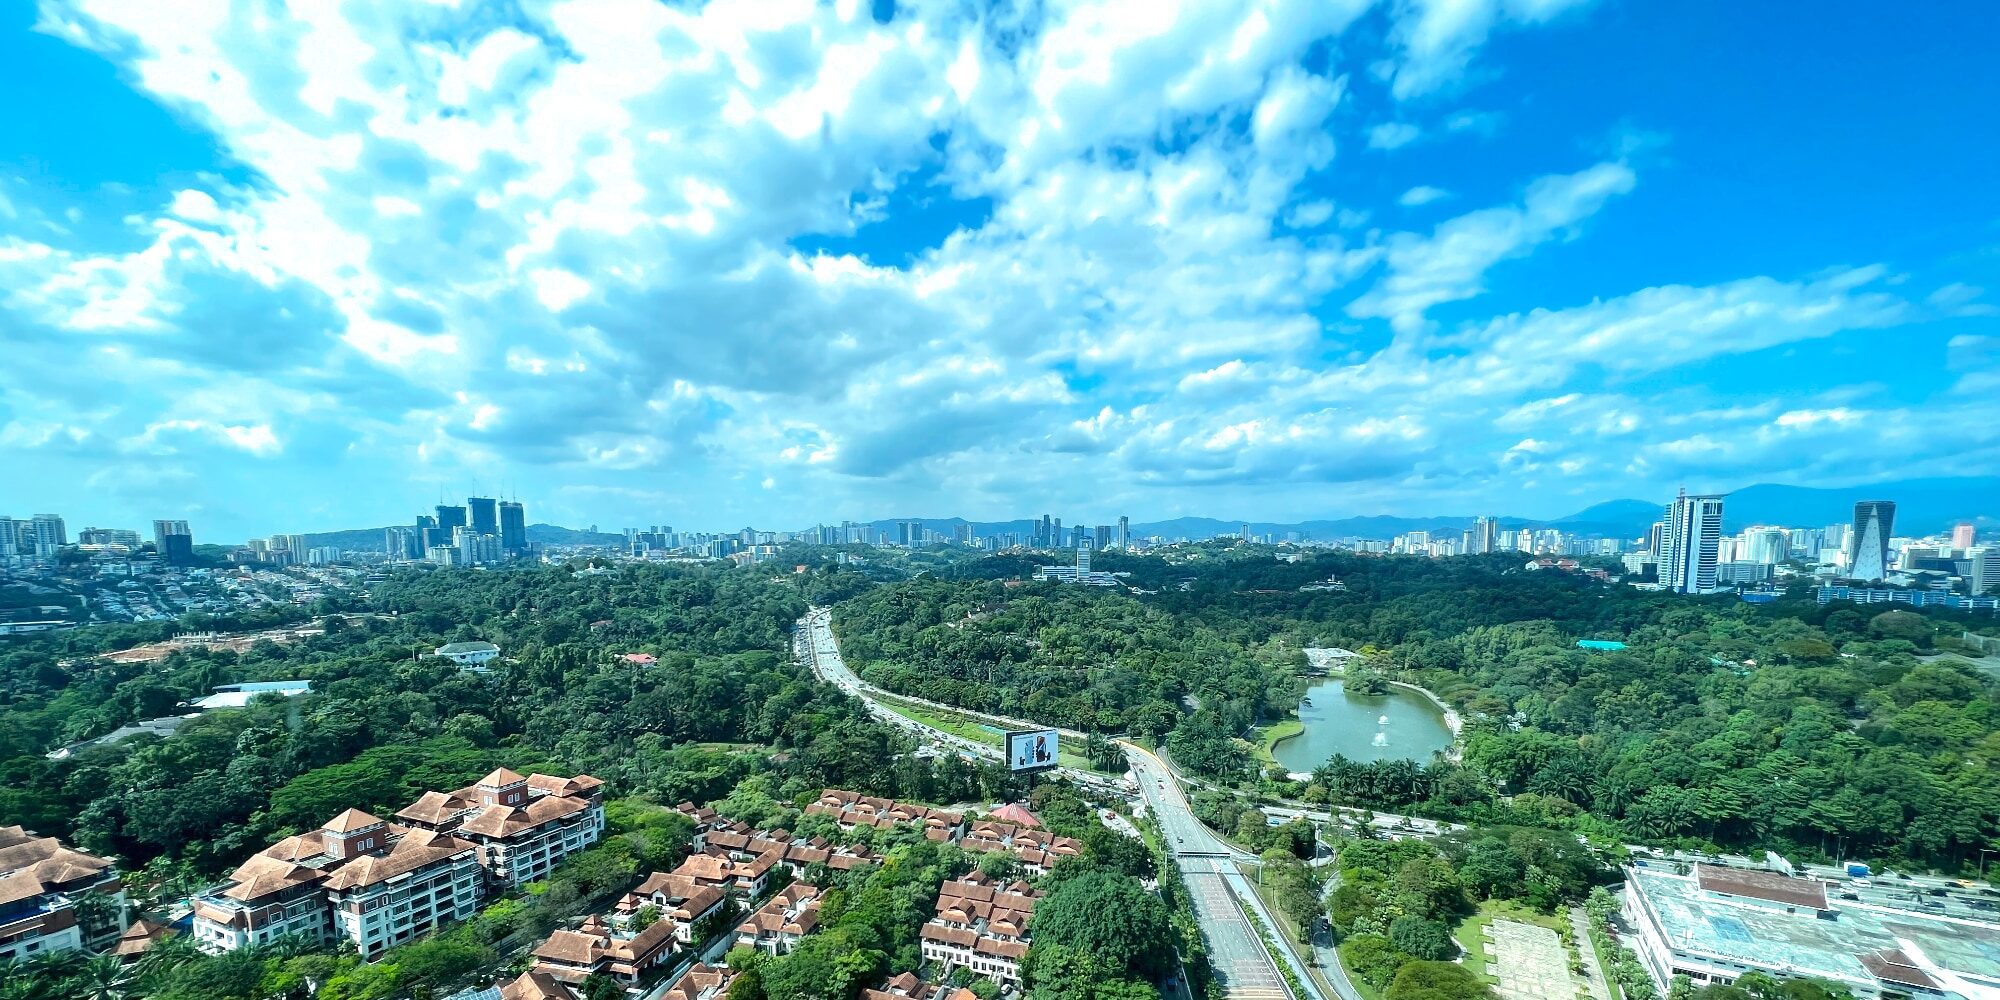 Wide angle view of the city of Kuala Lumpur from a high building